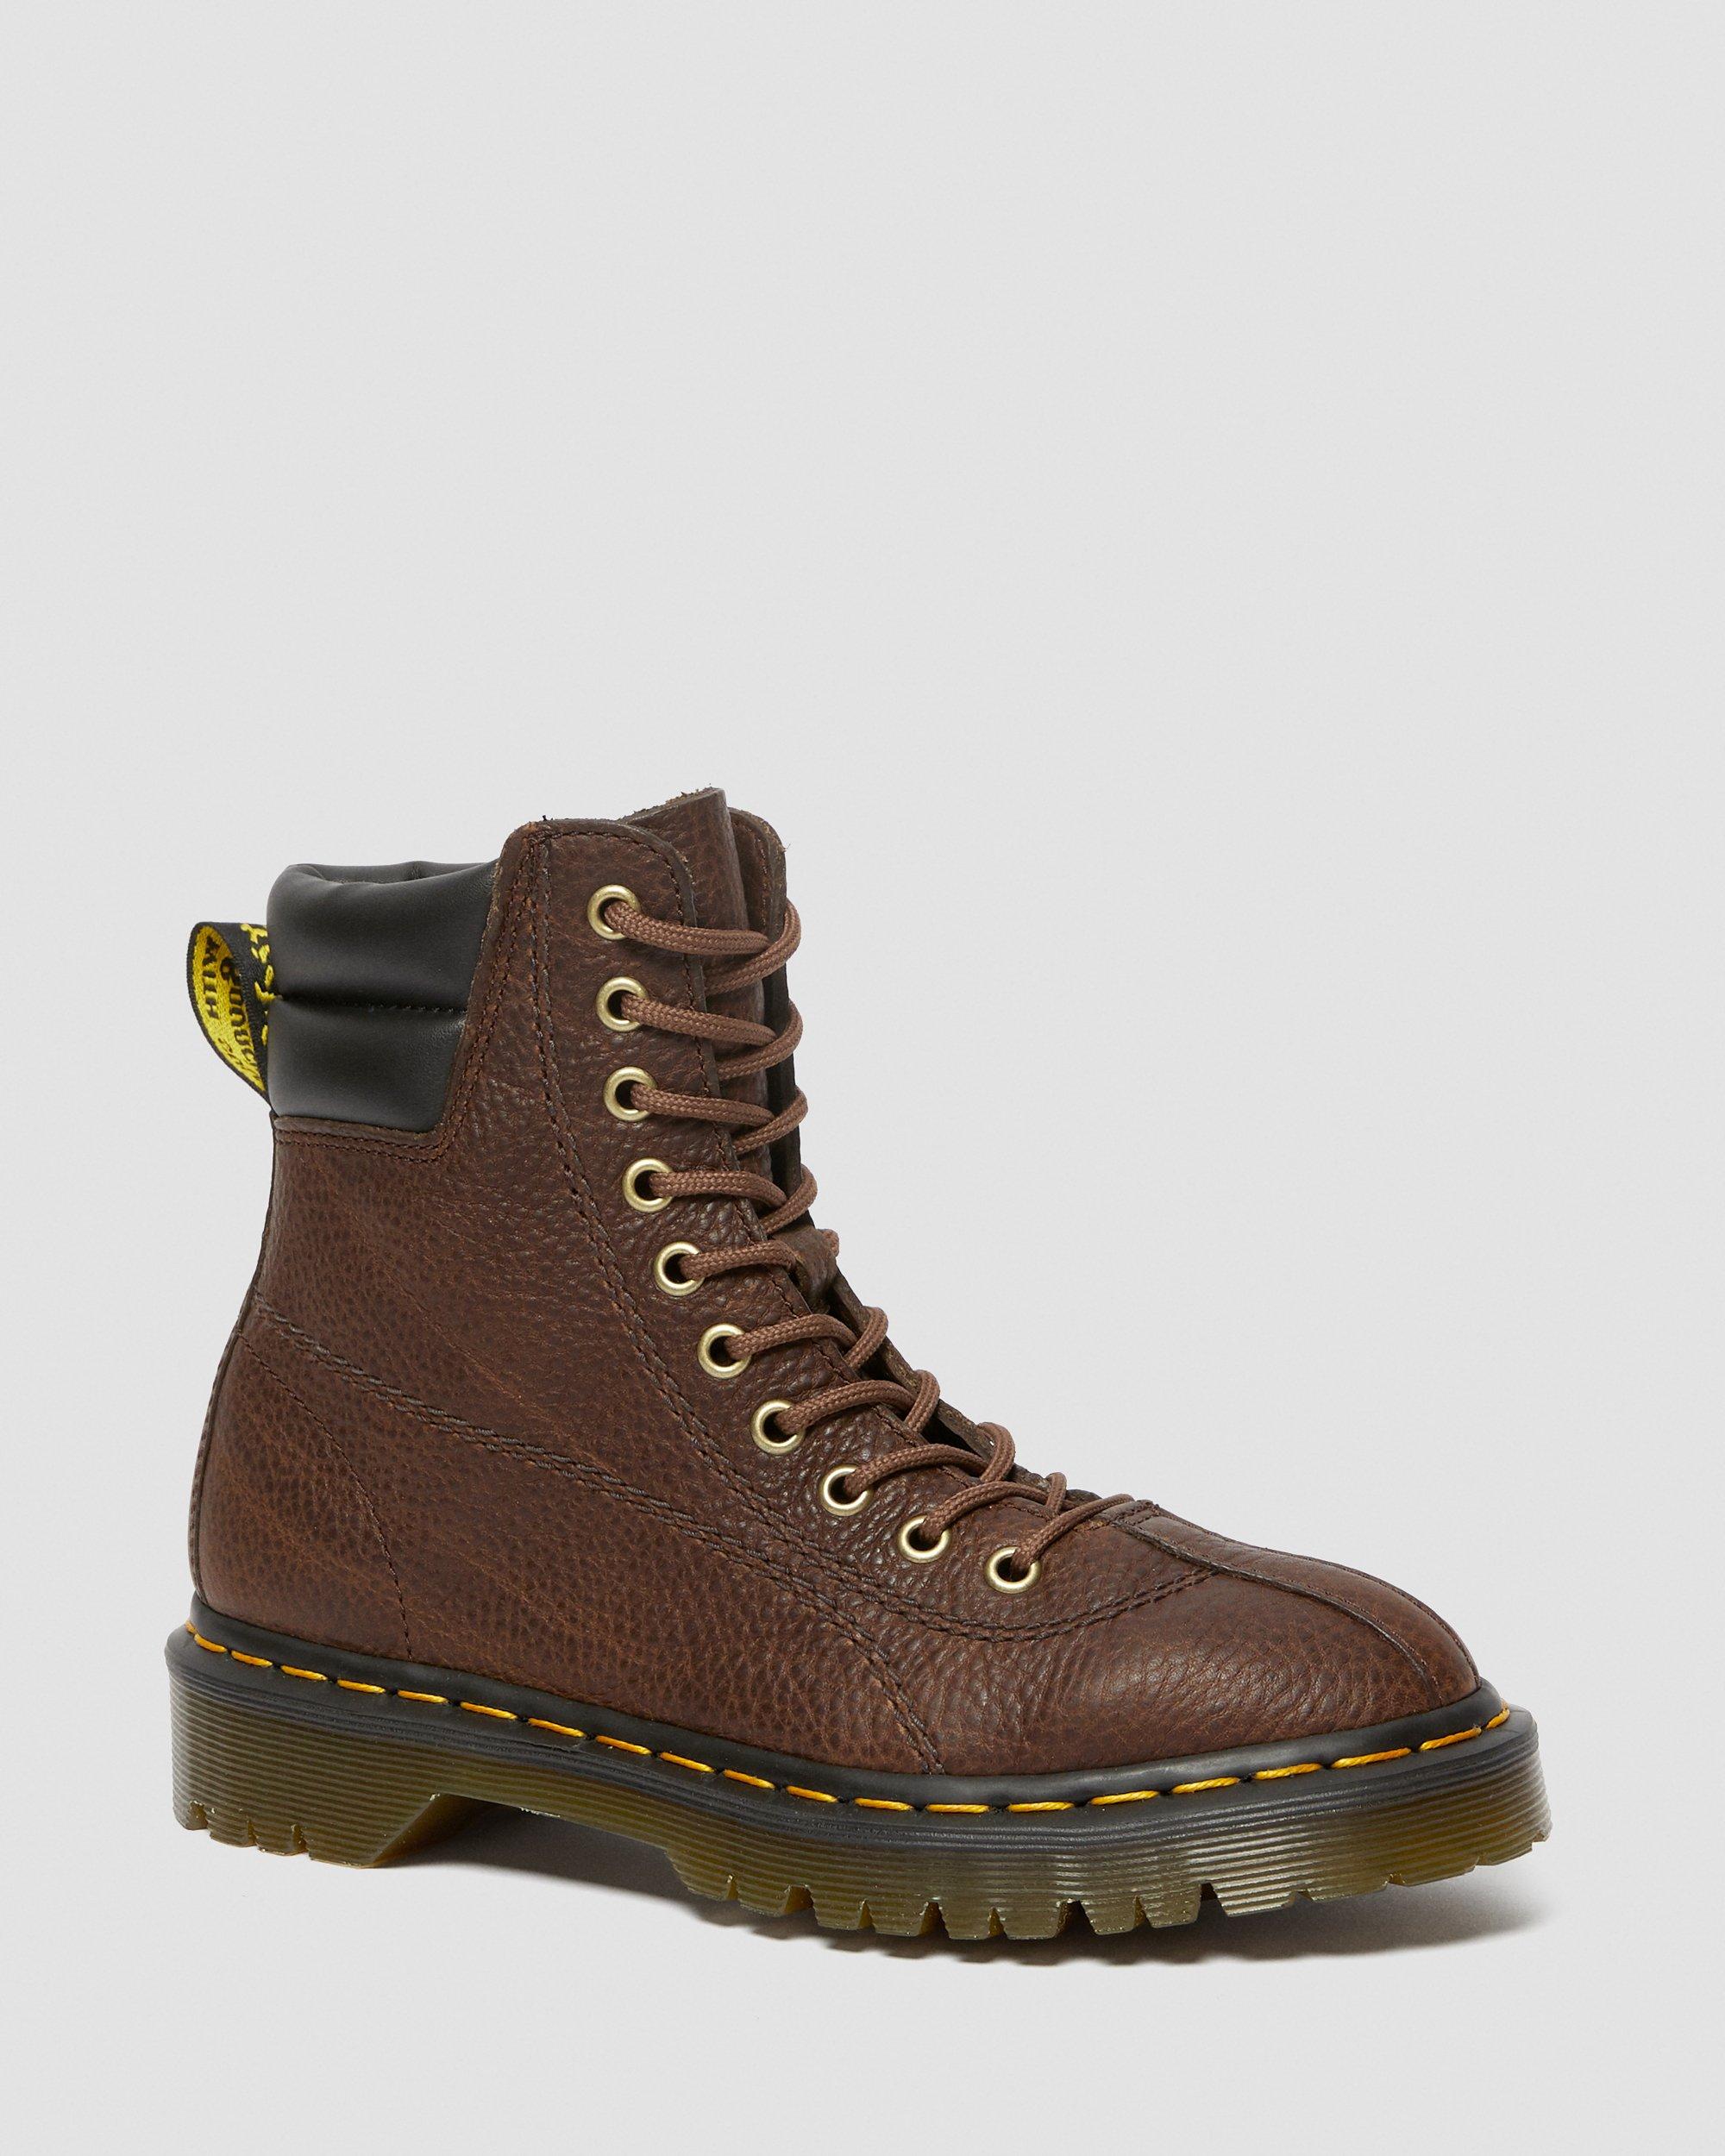 SANTO GRIZZLY | Dr. Martens